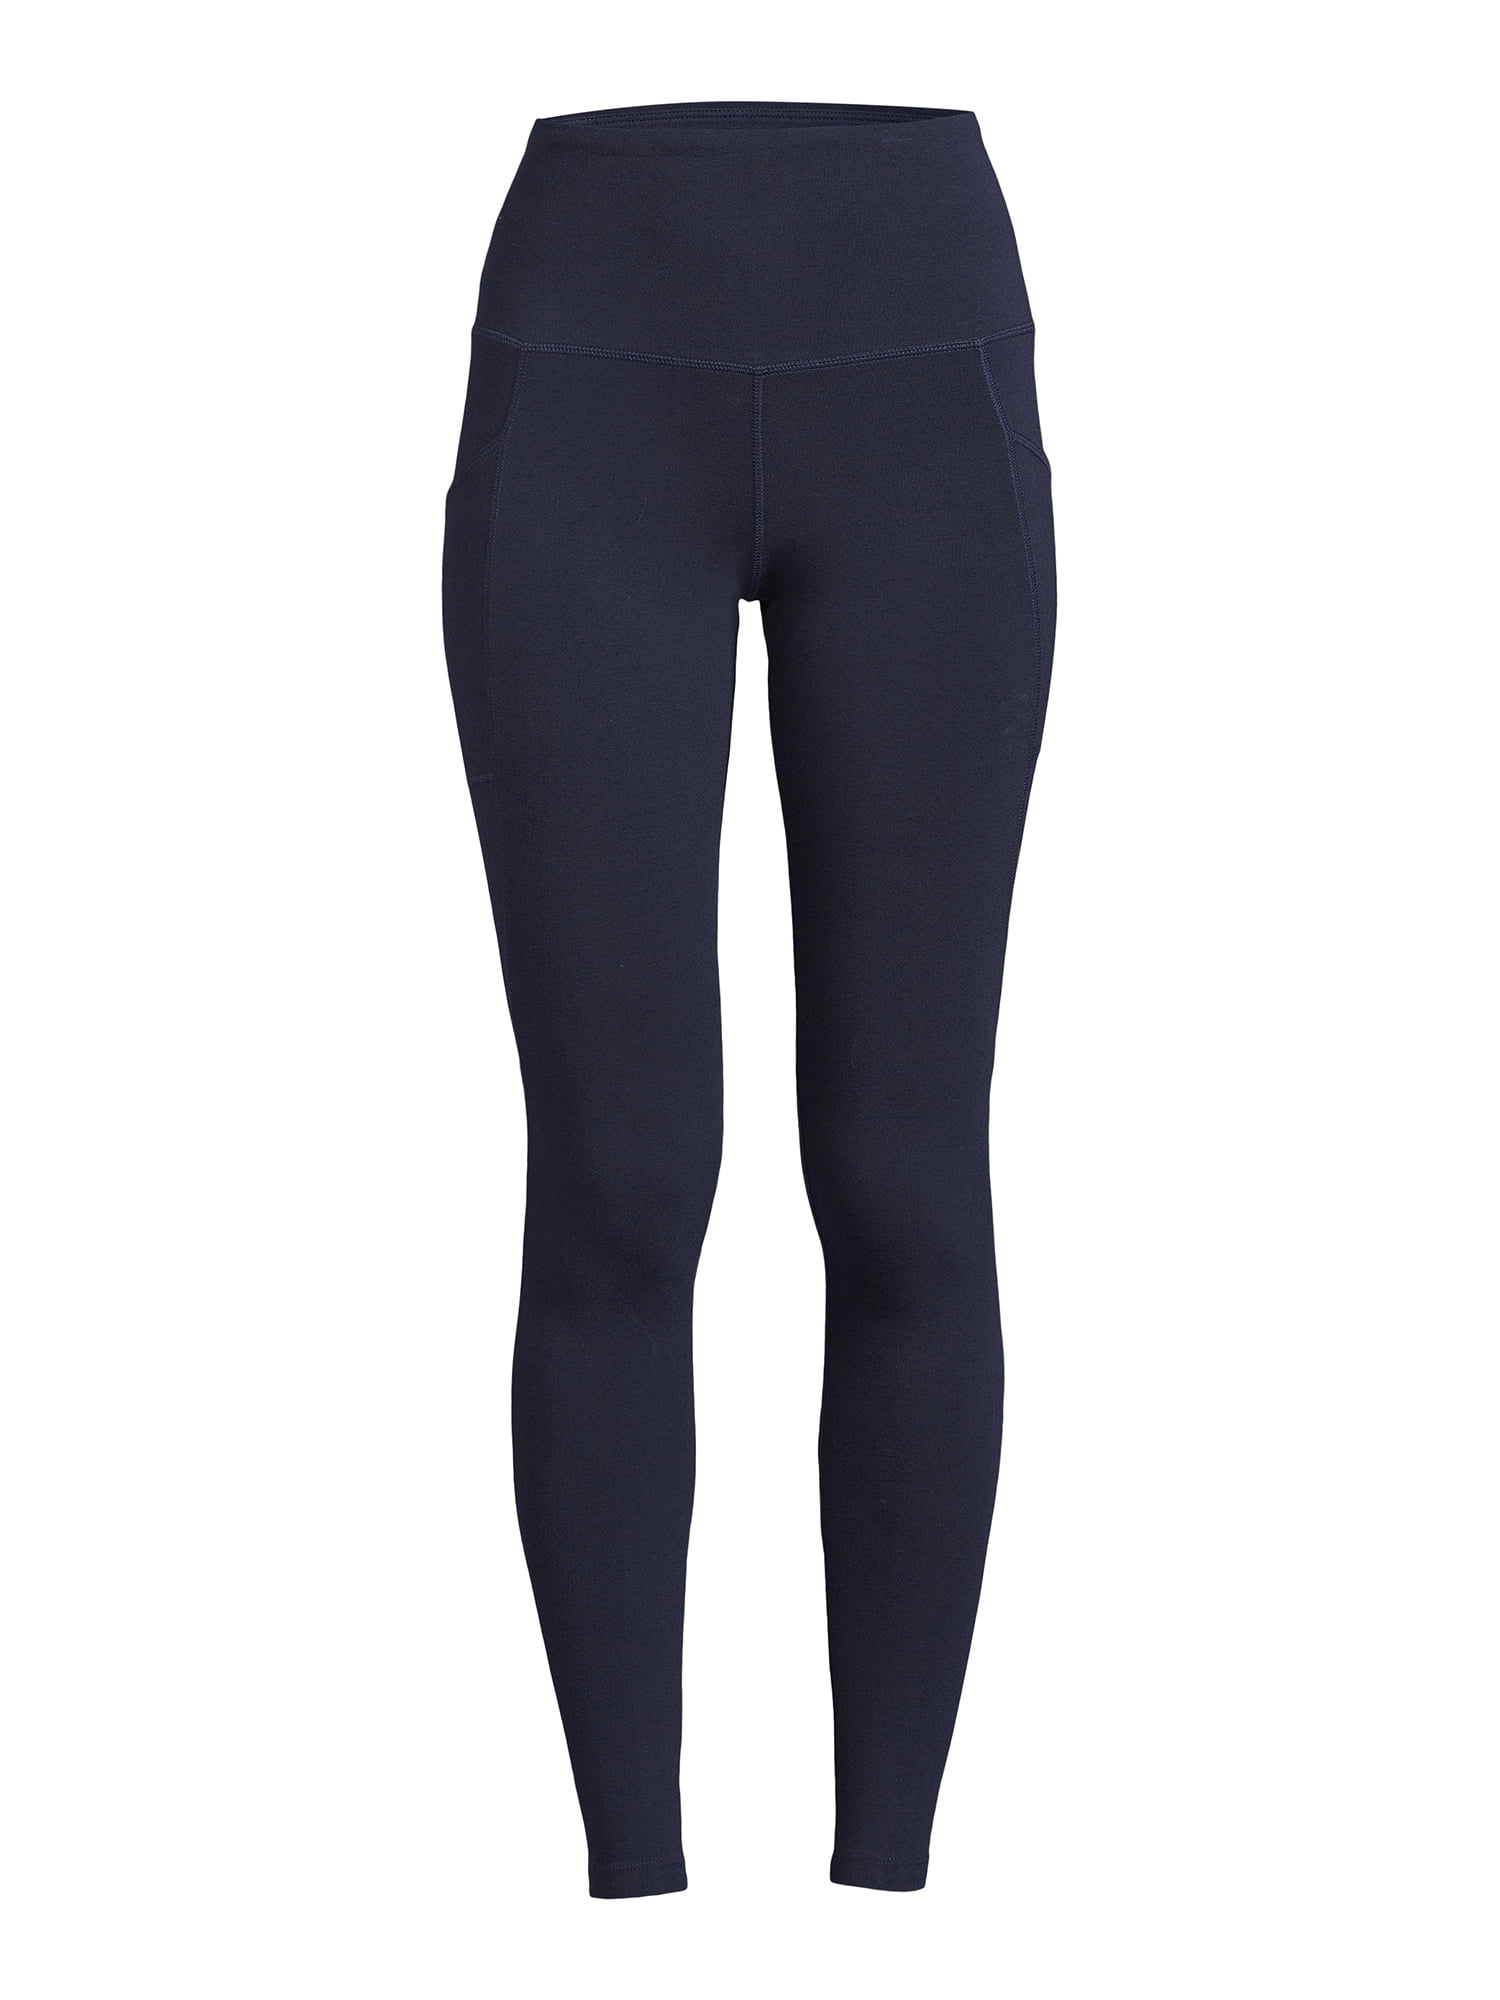 Jockey Essentials Women's Cotton-Blend Ankle Leggings with Side Pockets 